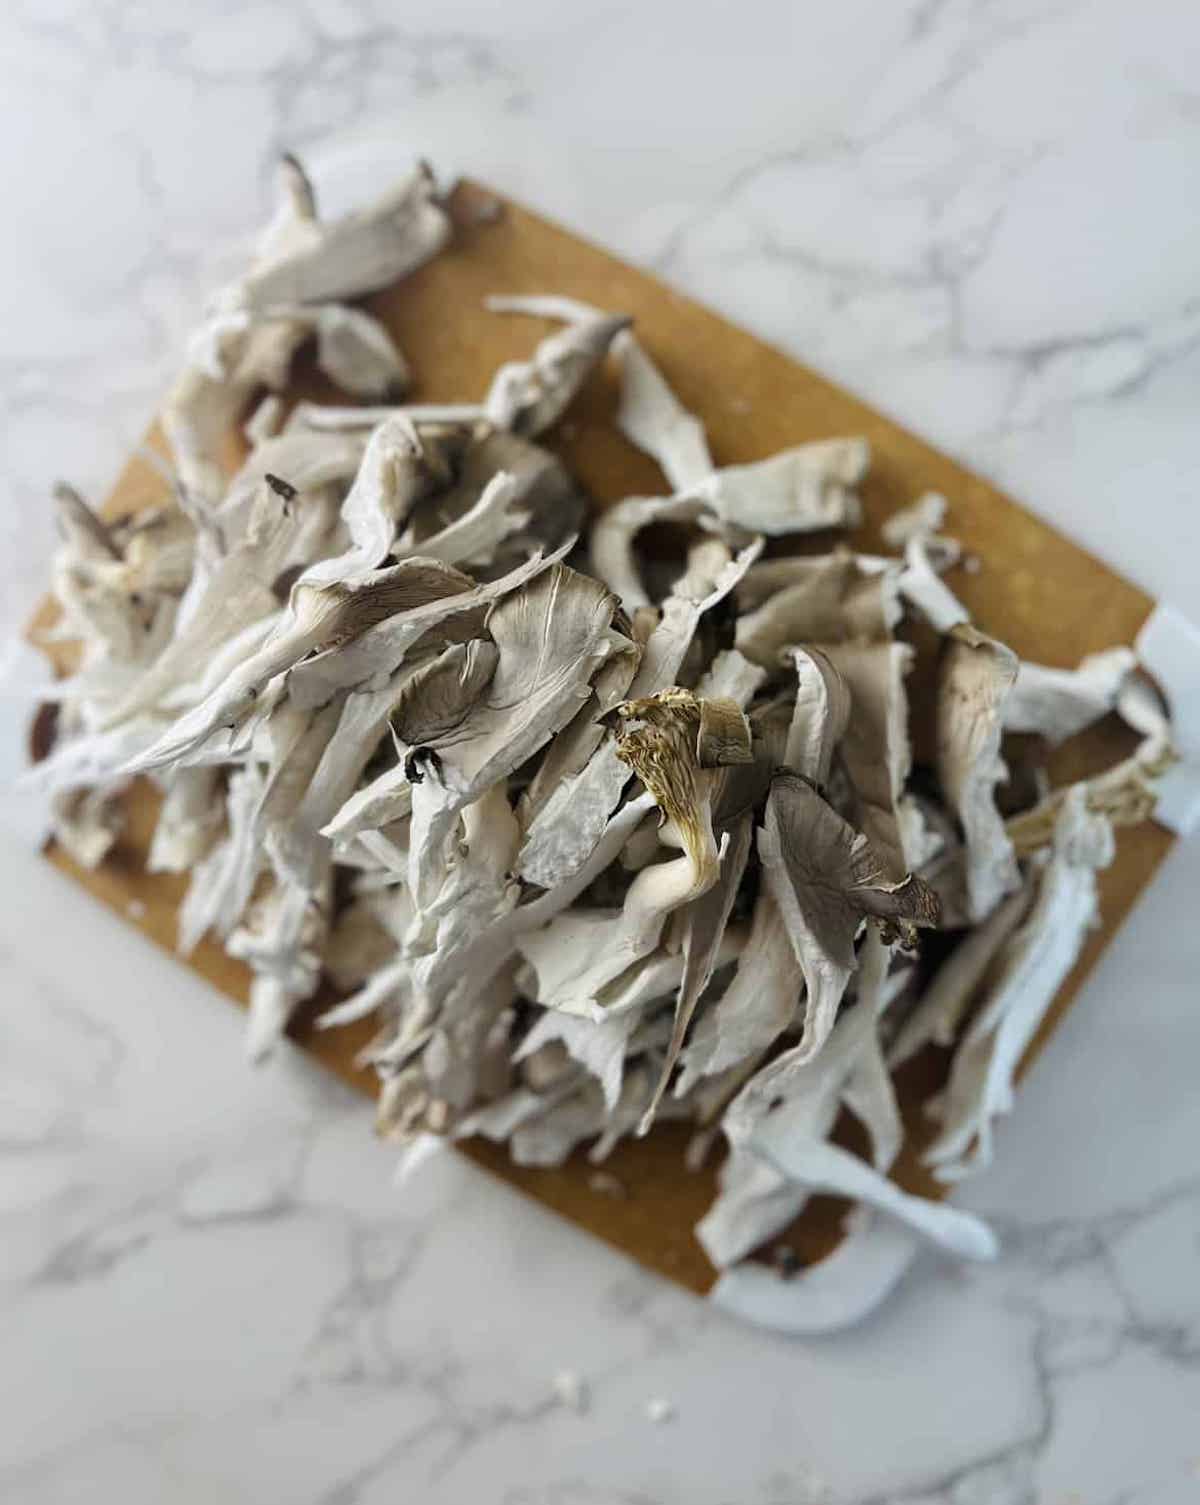 This is a photo of shredded oyster mushrooms.